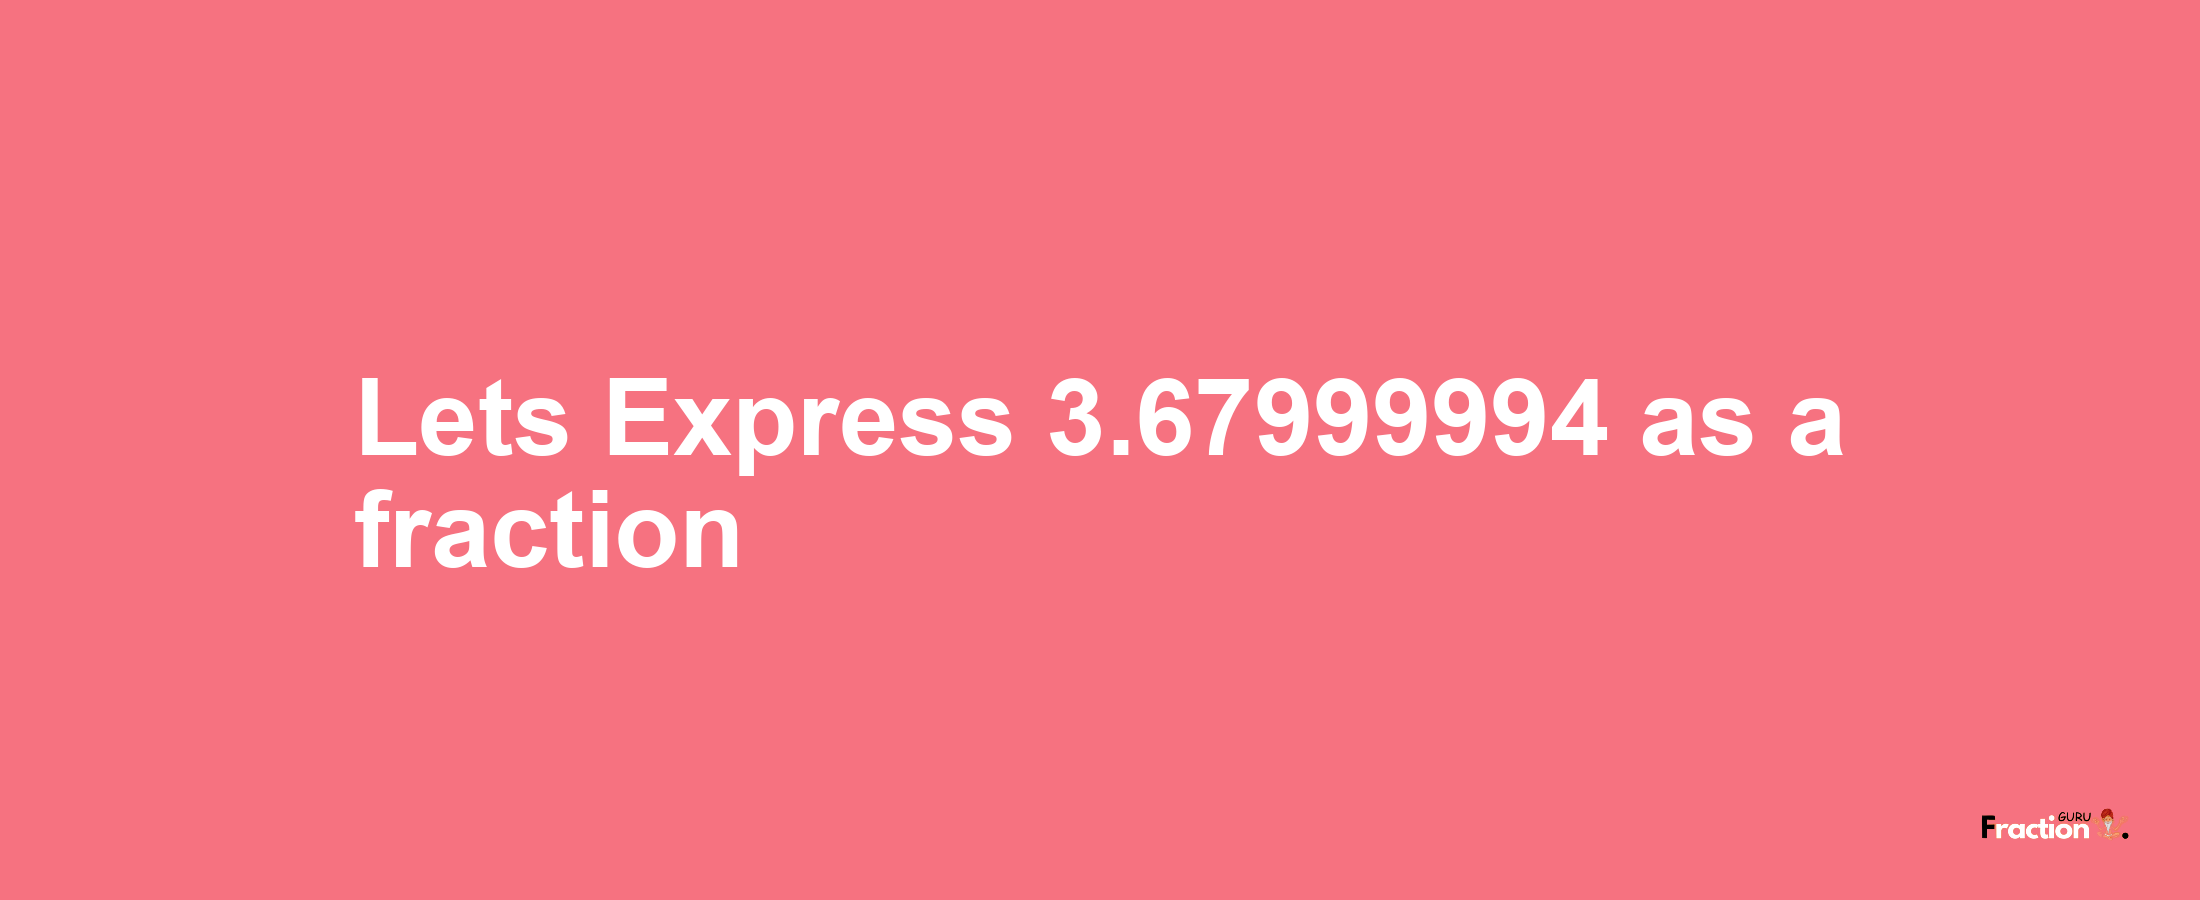 Lets Express 3.67999994 as afraction